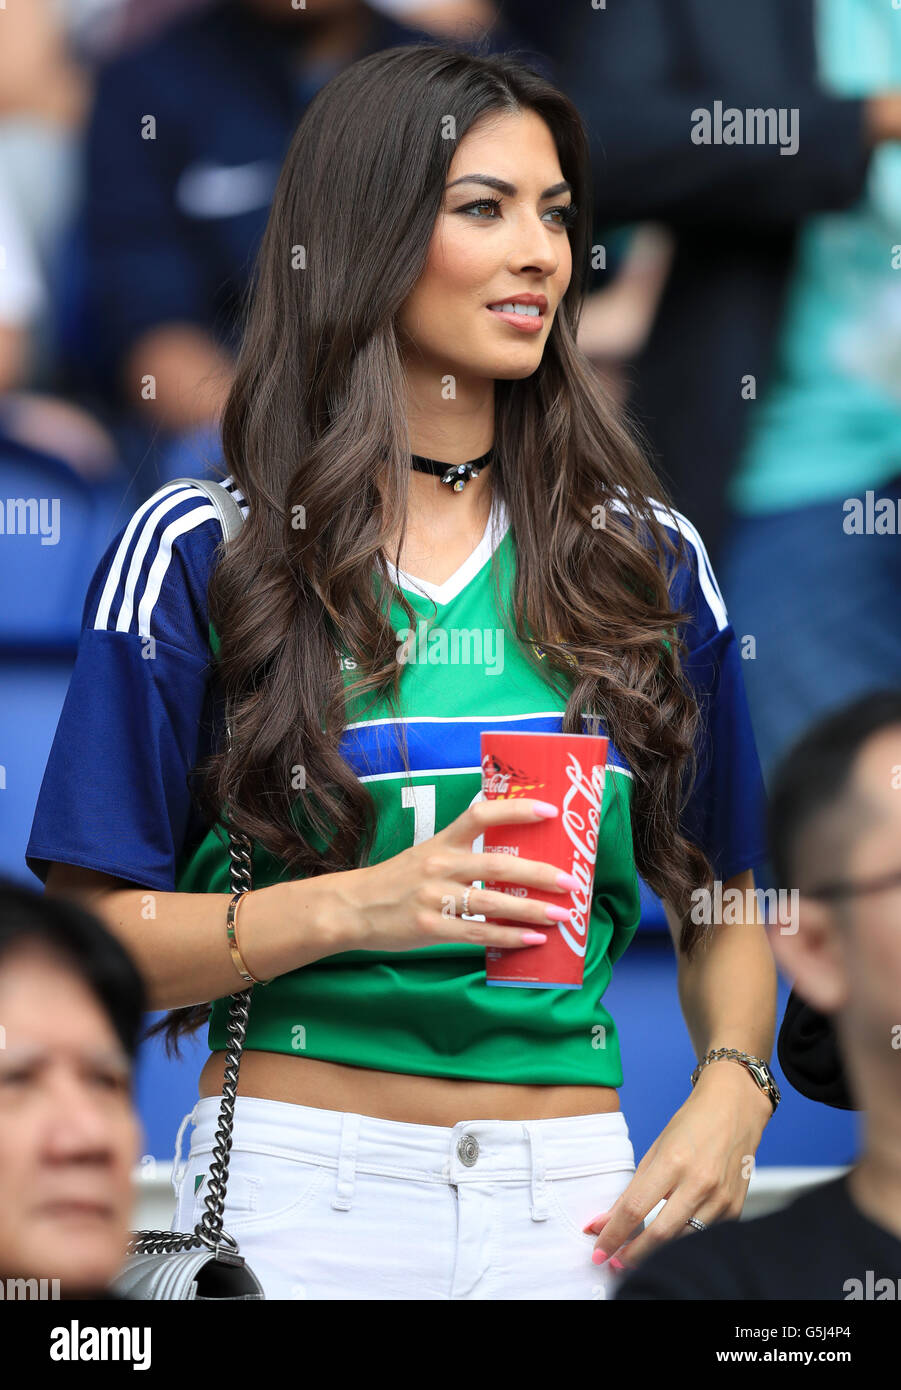 vanessa-chung-wife-of-northern-irelands-kyle-lafferty-in-the-stands-G5J4P4.jpg